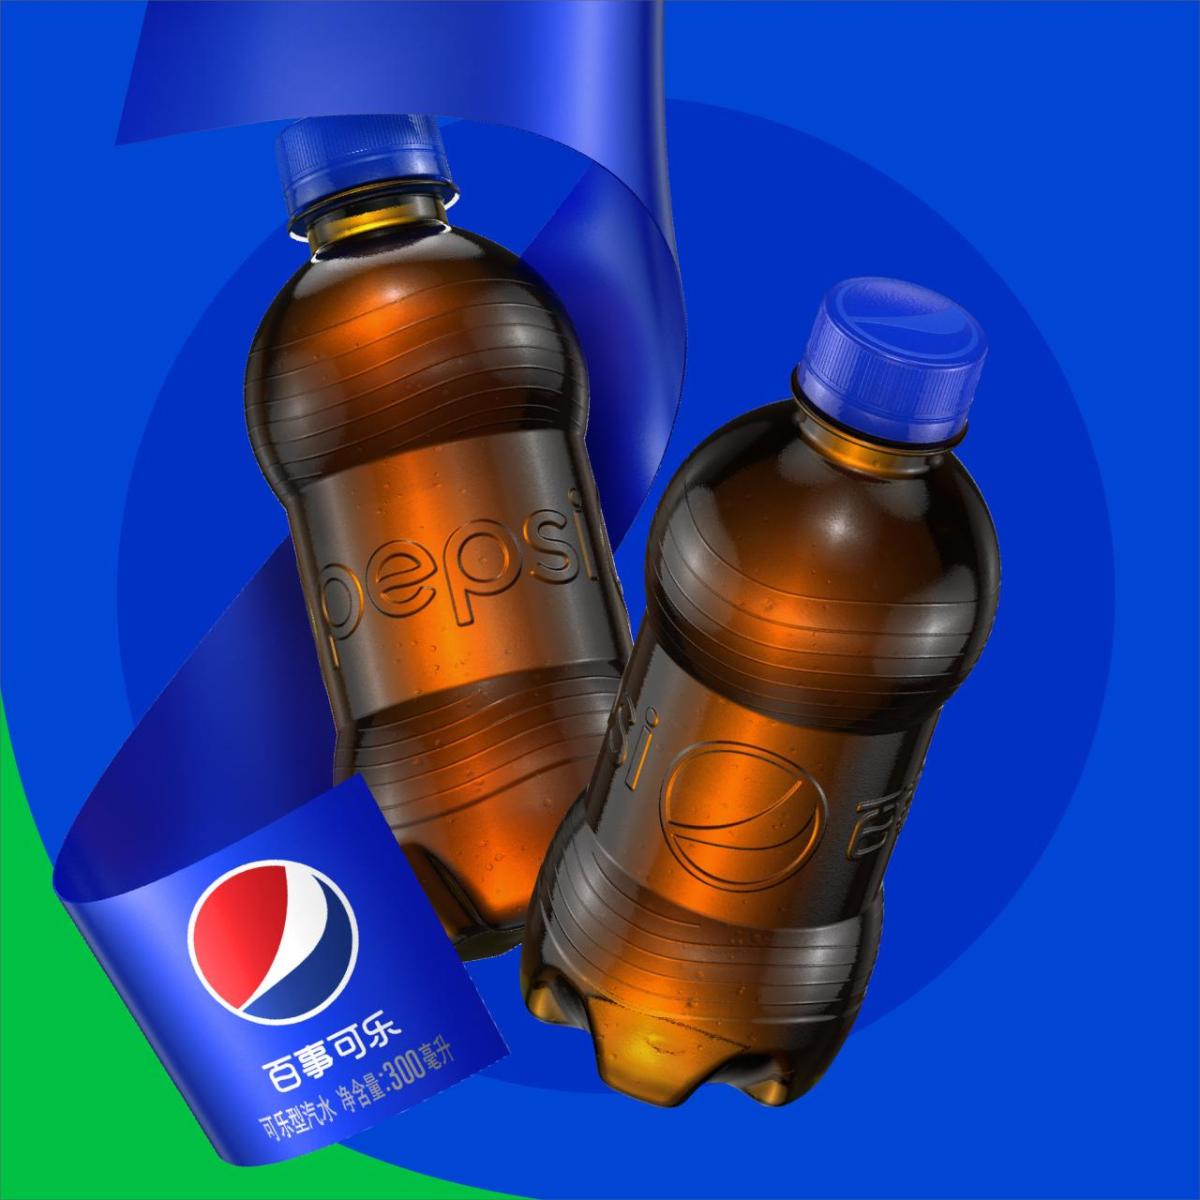 Digital pepsi bottles and label in a foreign language.